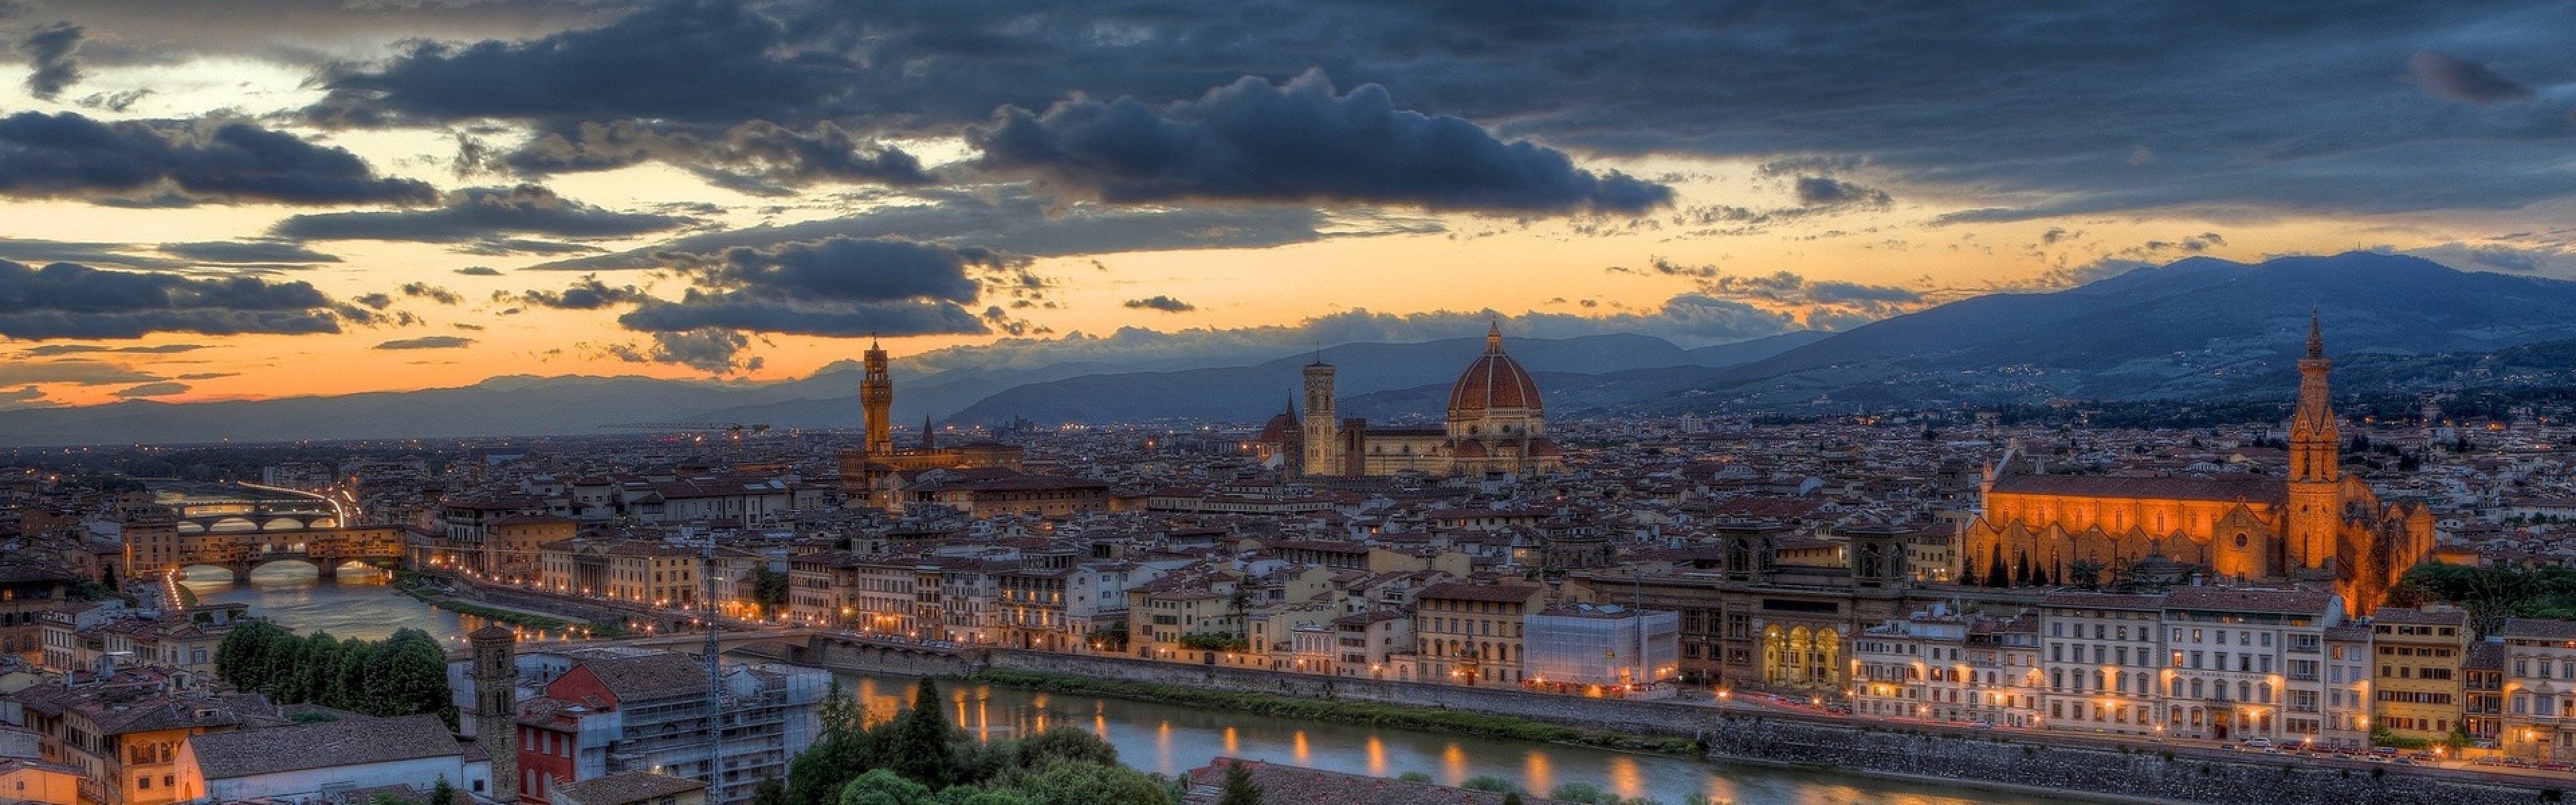 3840x1200  Wallpaper florence, italy, buildings, panorama, hdr